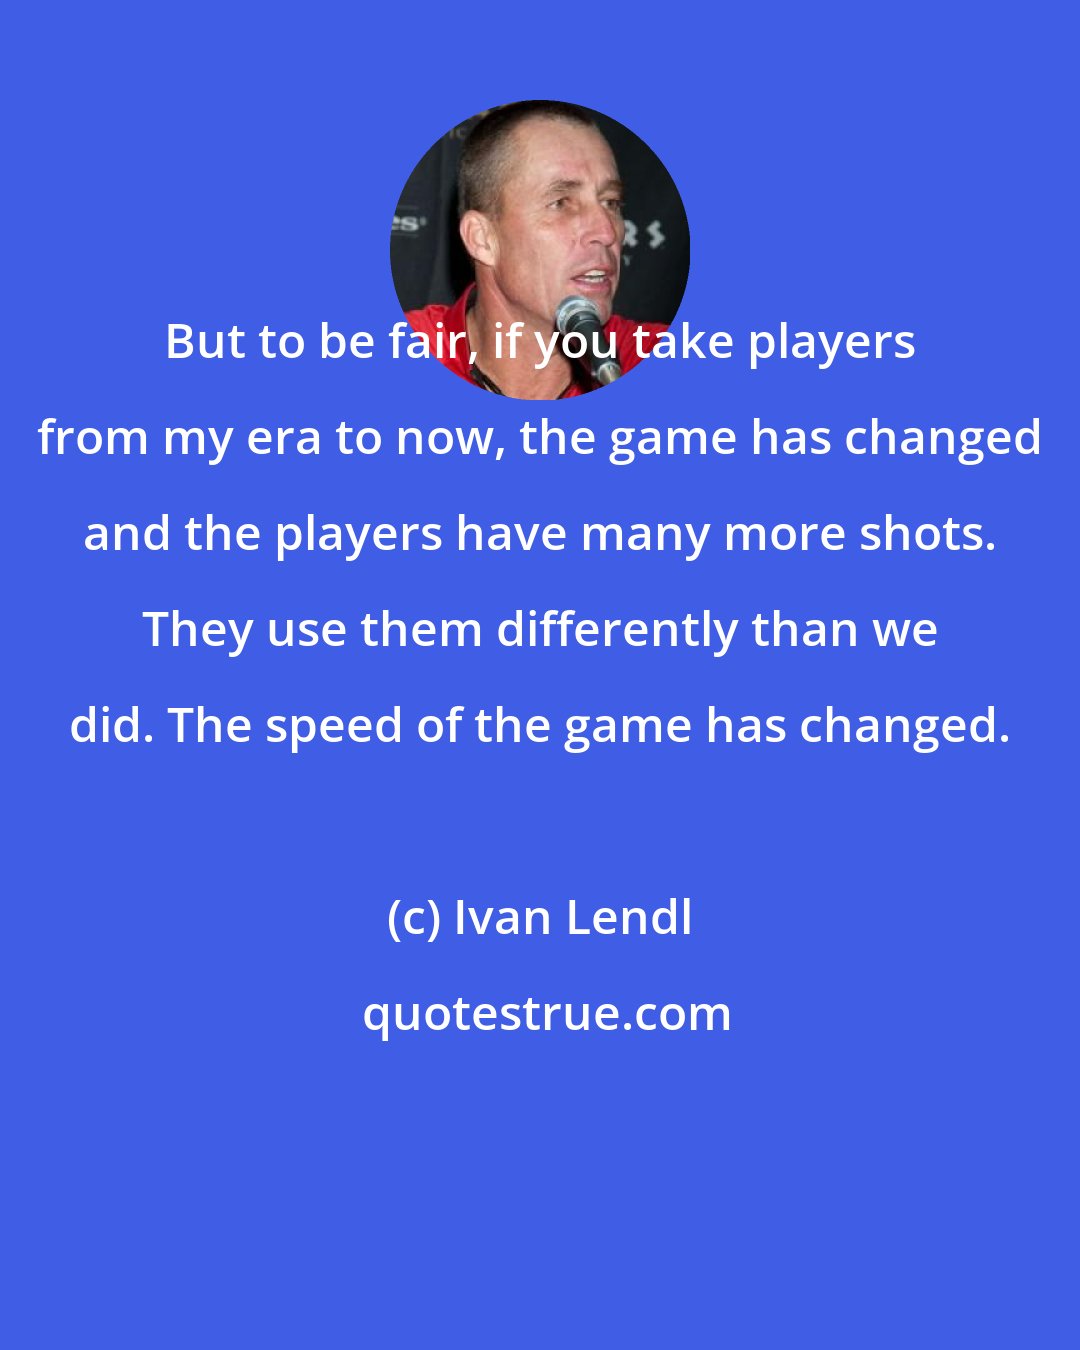 Ivan Lendl: But to be fair, if you take players from my era to now, the game has changed and the players have many more shots. They use them differently than we did. The speed of the game has changed.